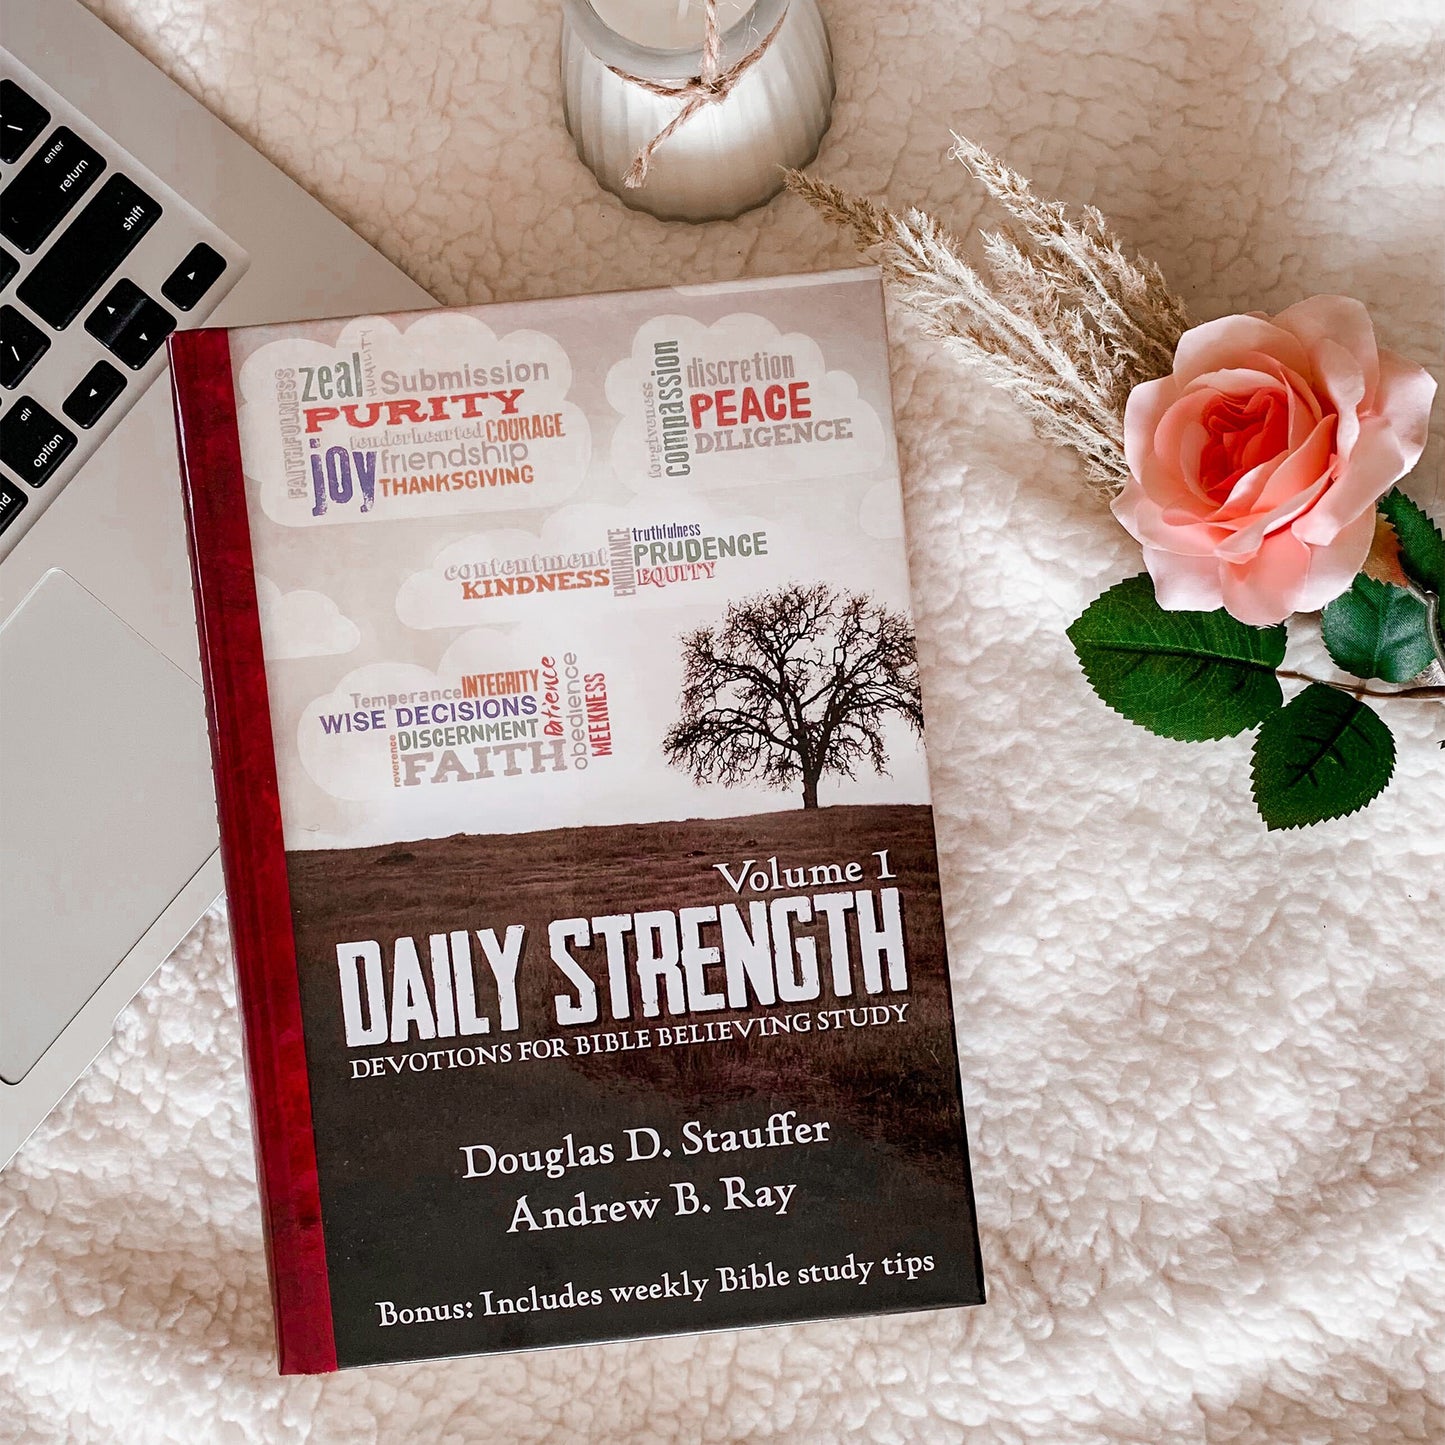 Daily Strength v. 1: Devotions for Bible Believing Study